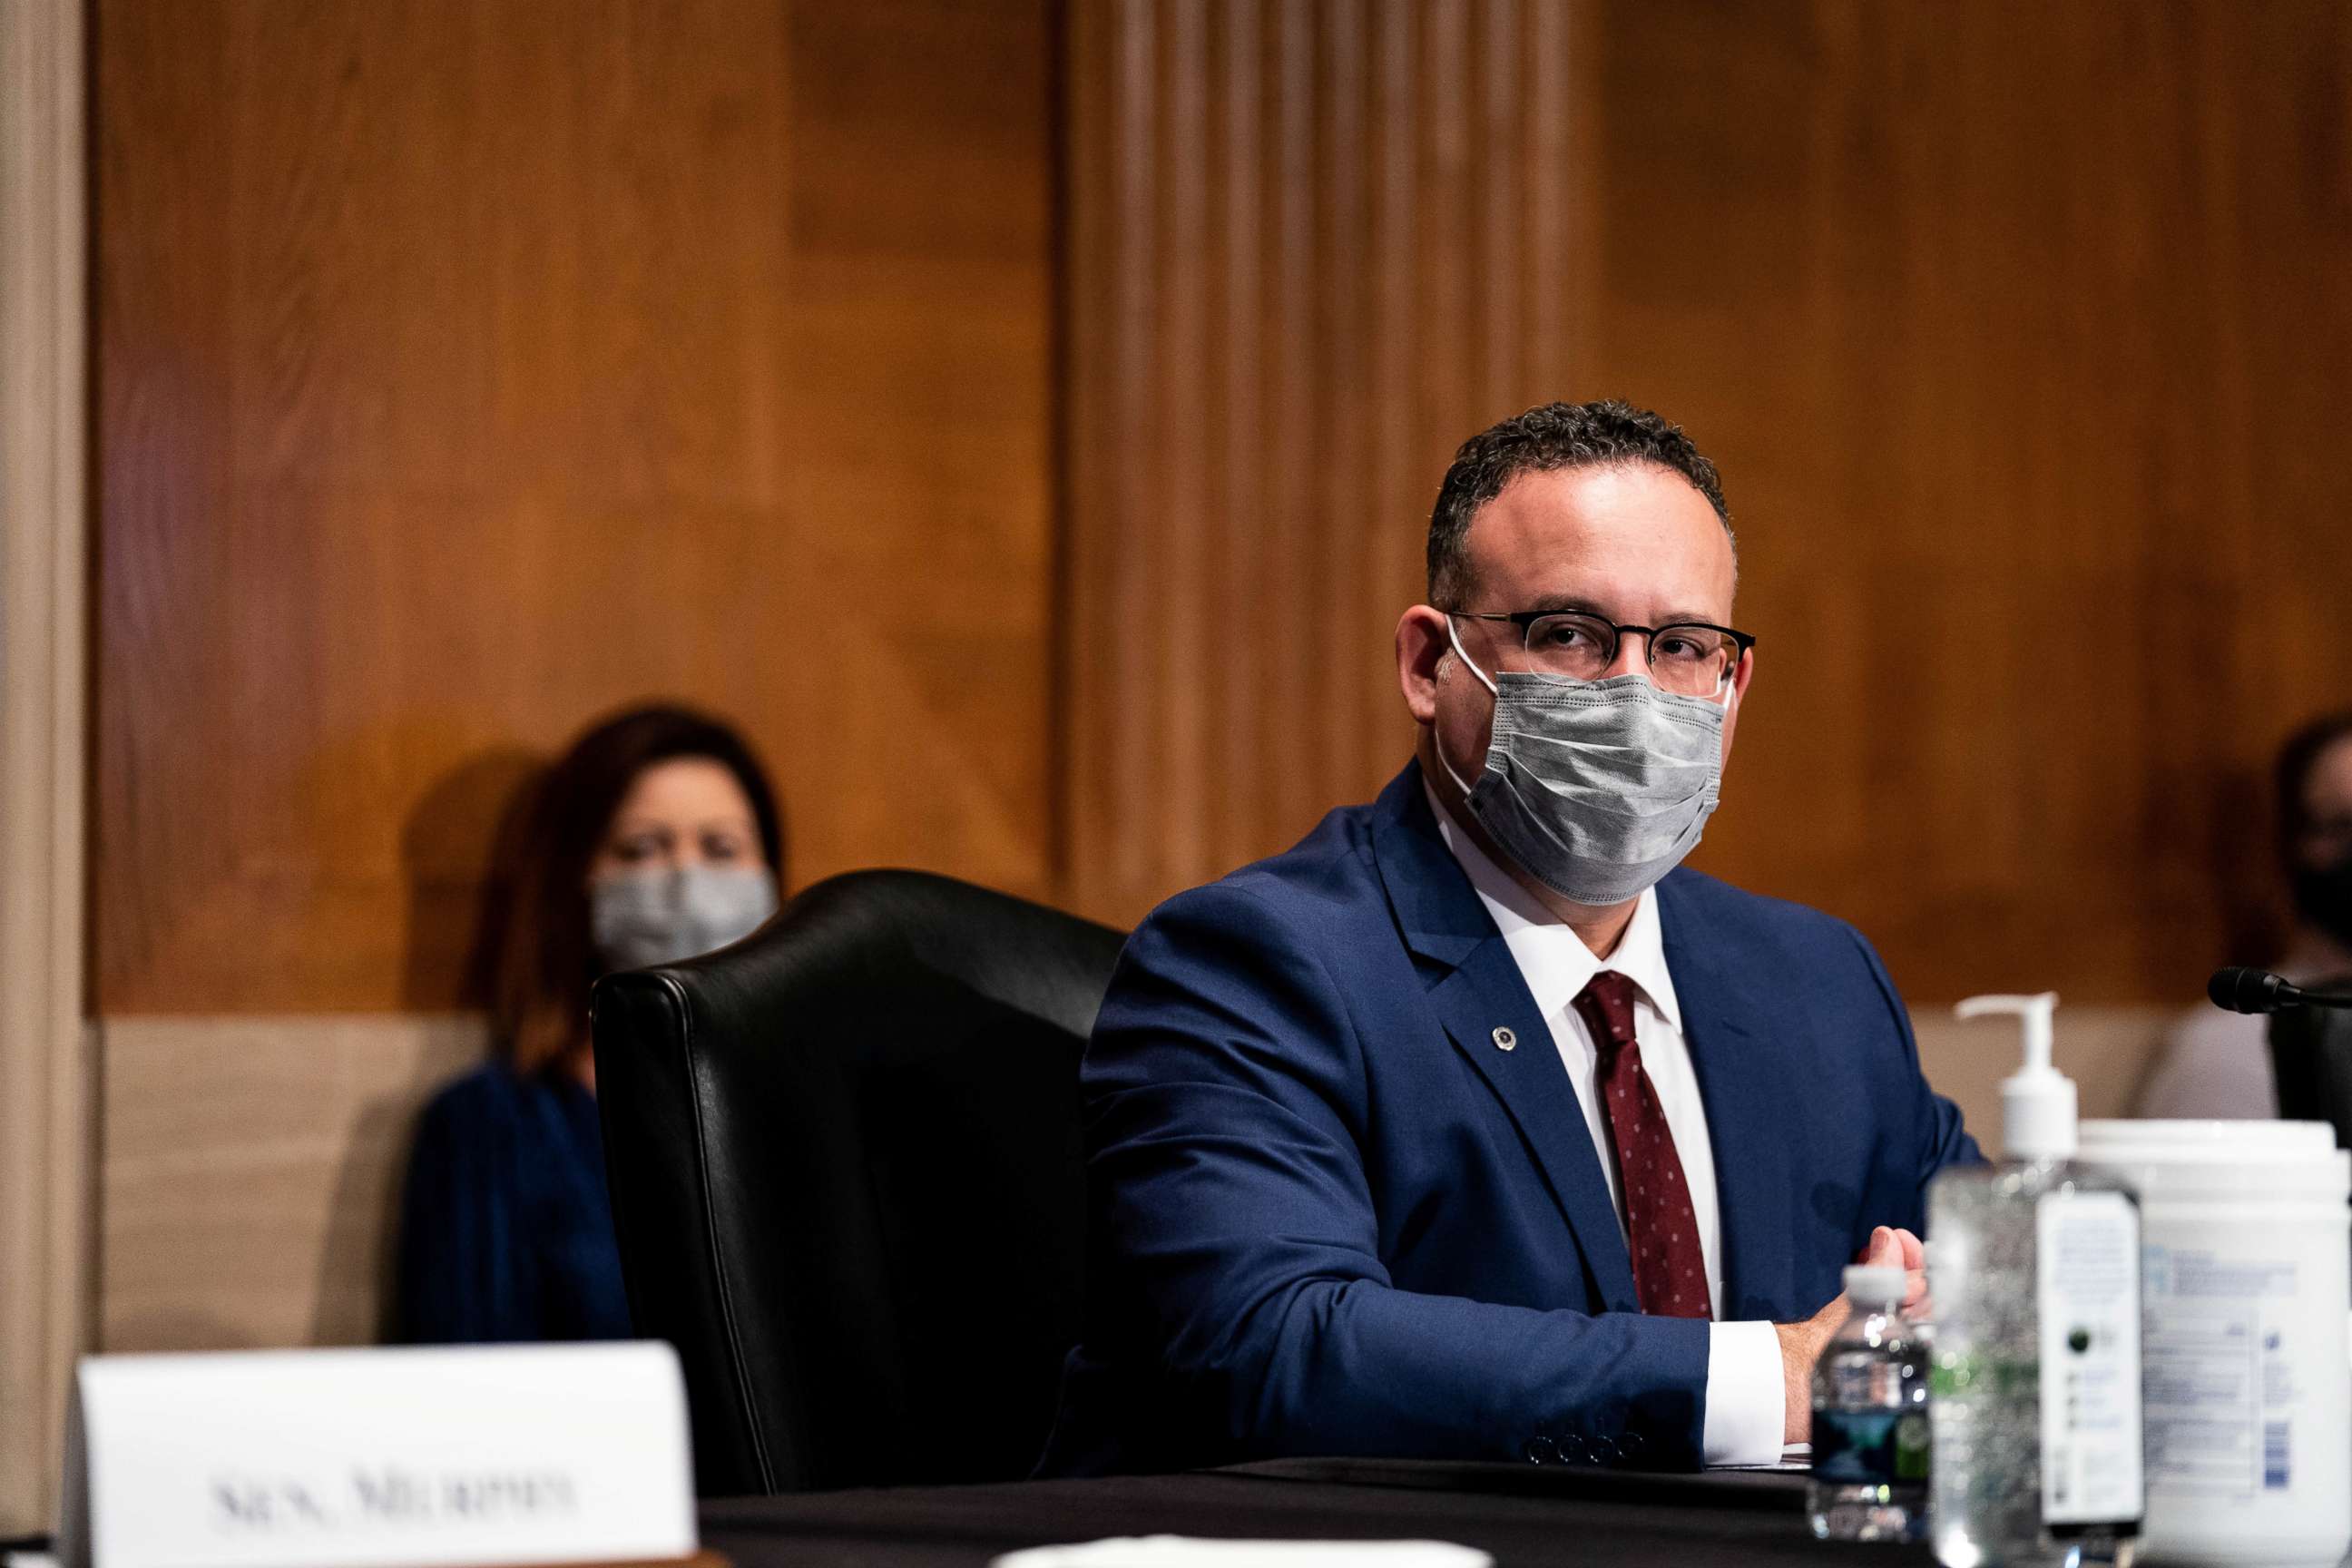 PHOTO: Education Secretary nominee Miguel Cardona testifies before the Senate Health, Education, Labor and Pensions committee during his confirmation hearing on Capitol Hill in Washington, DC, Feb. 3, 2021.